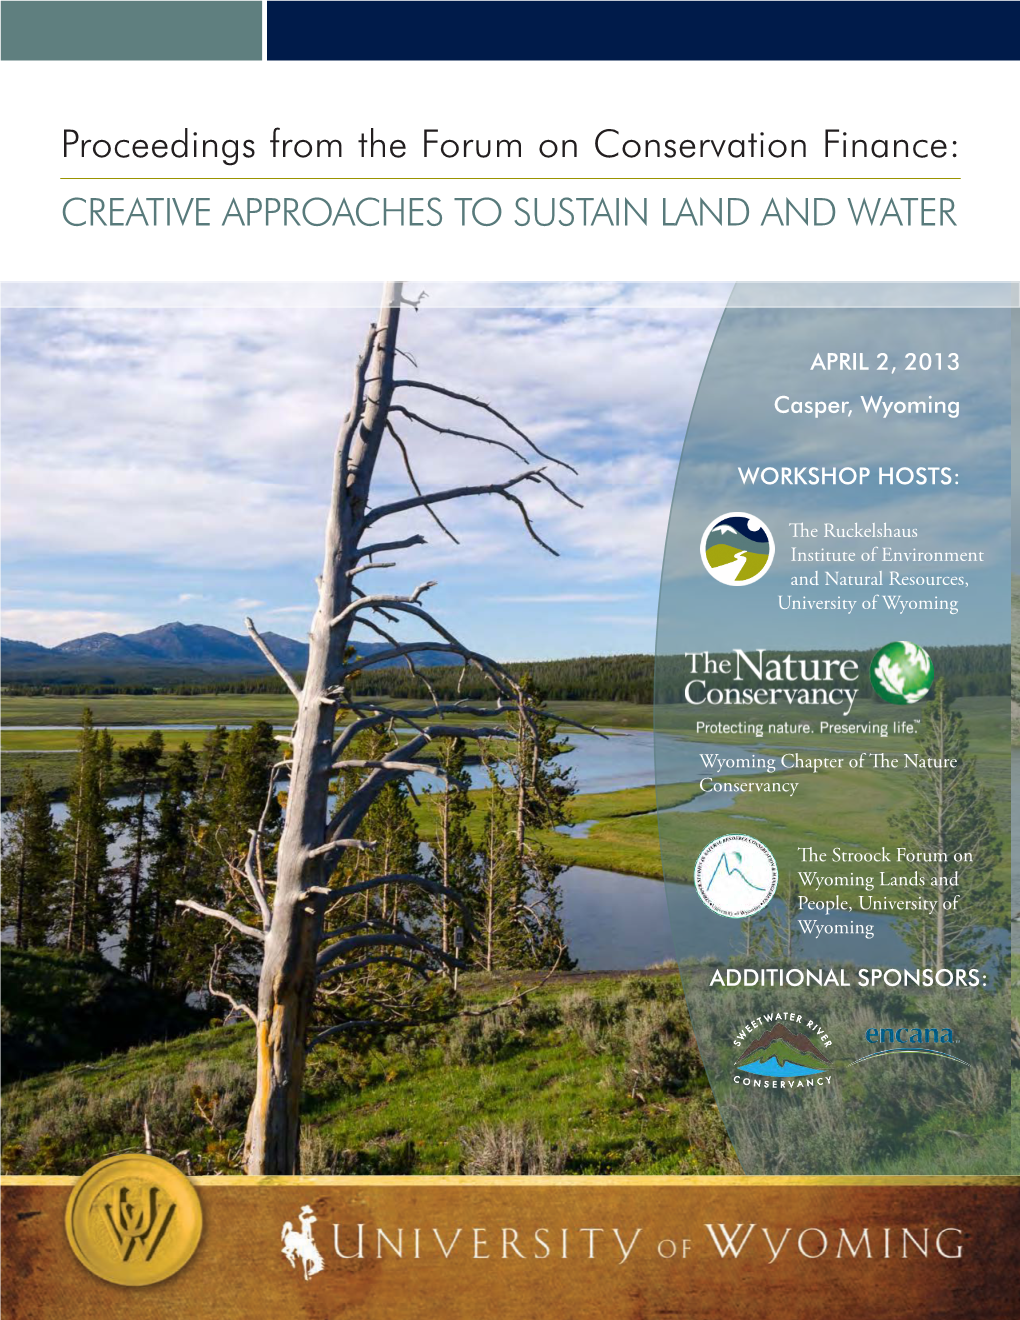 Proceedings from the Forum on Conservation Finance: CREATIVE APPROACHES to SUSTAIN LAND and WATER